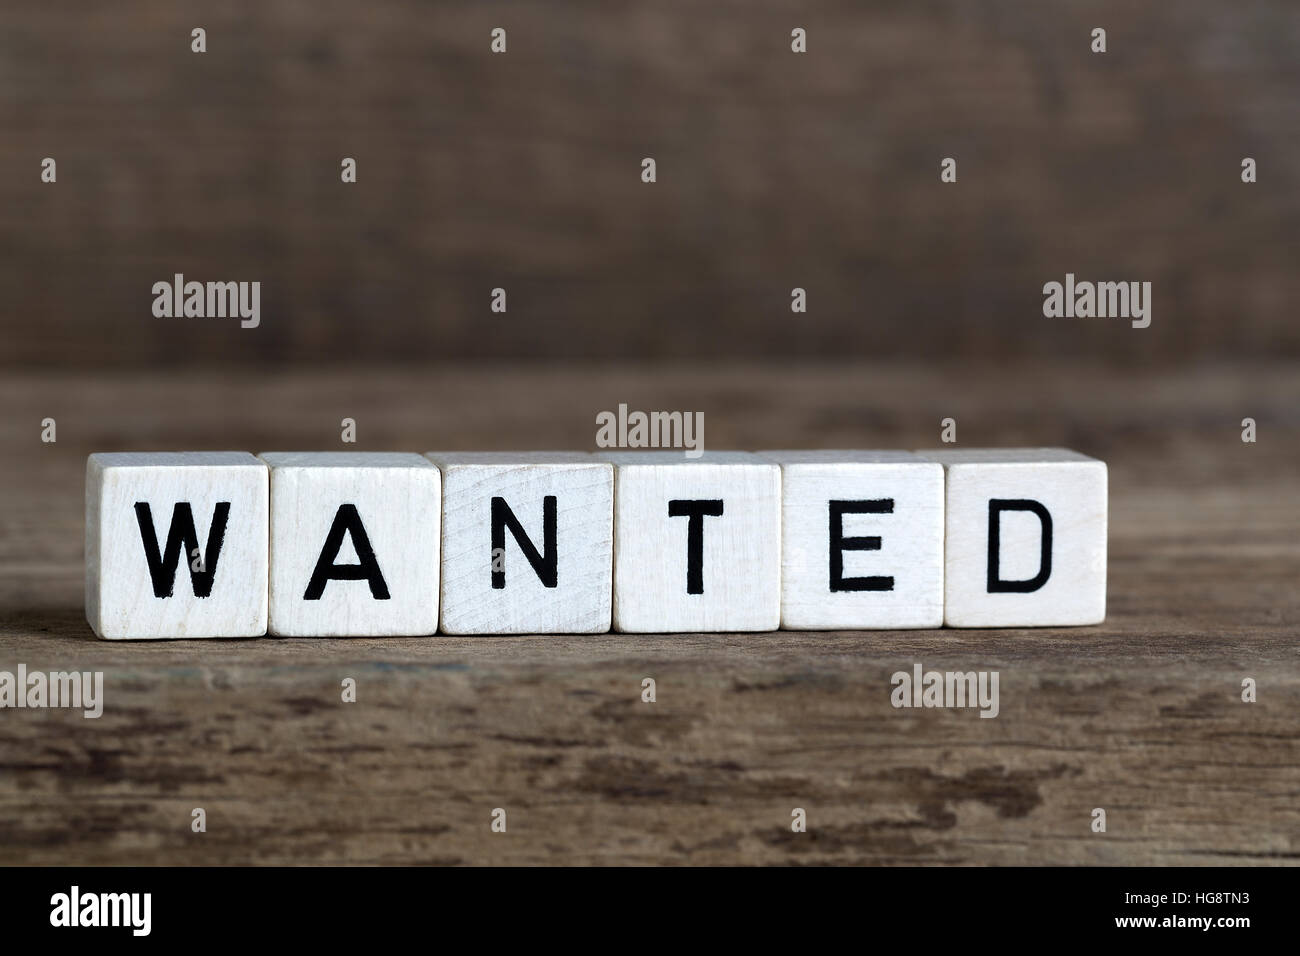 Wanted, written in cubes on wooden background Stock Photo